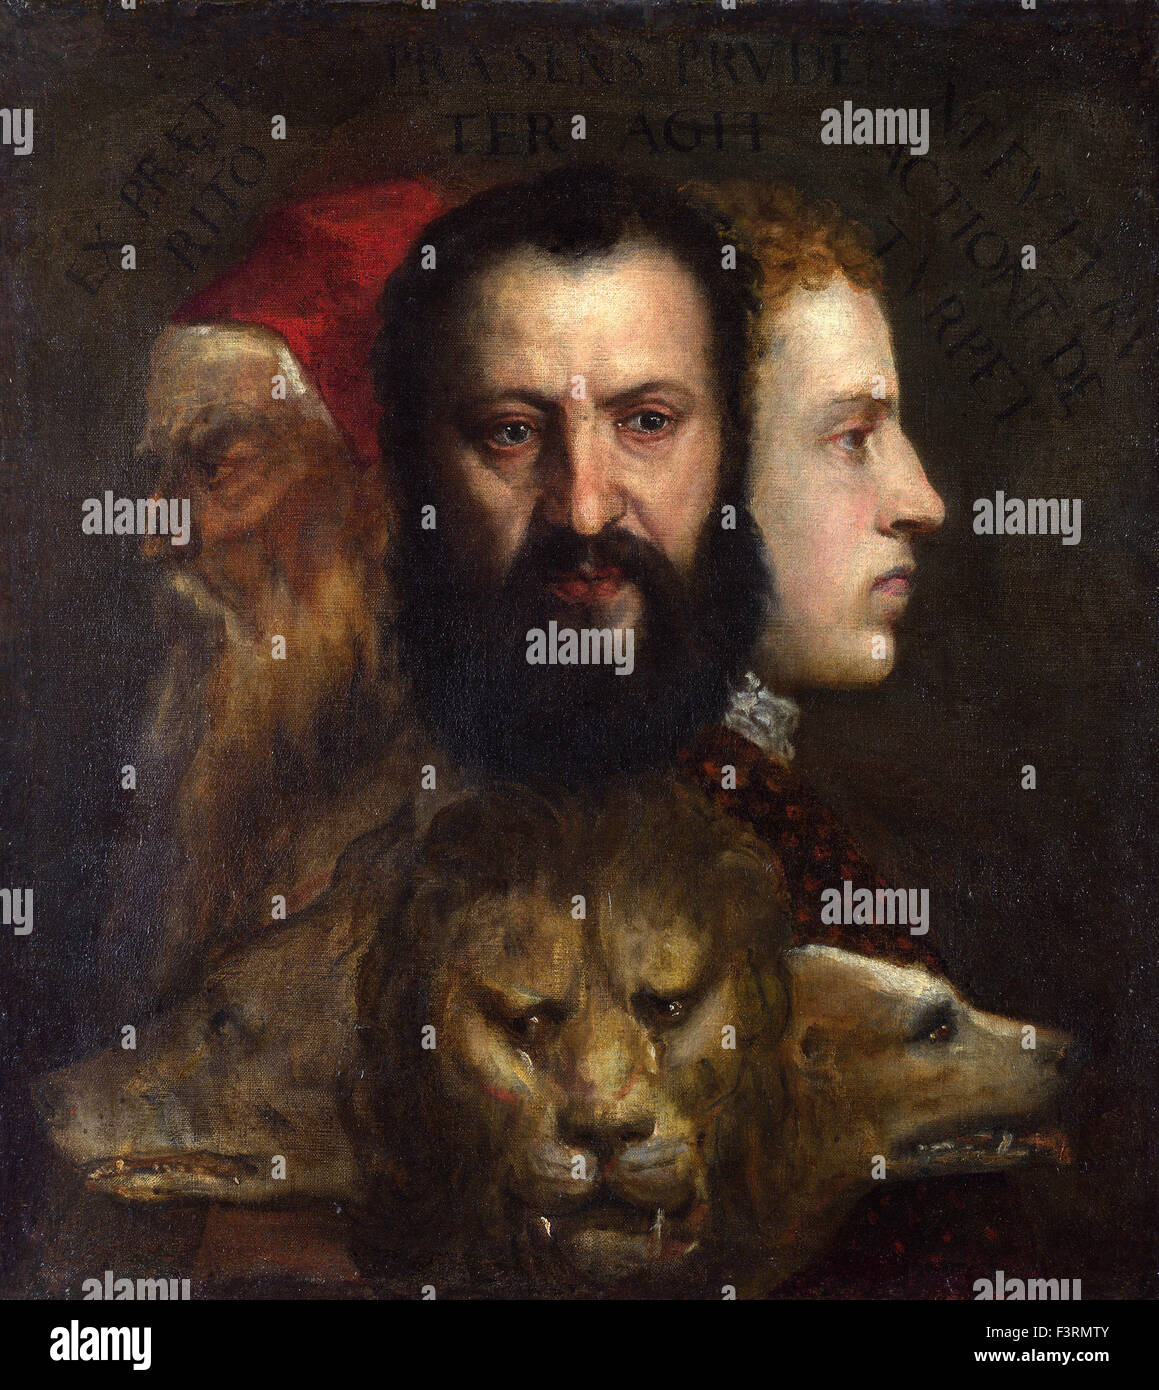 Tiziano Vecellio - Titian - An Allegory of Prudence Stock Photo